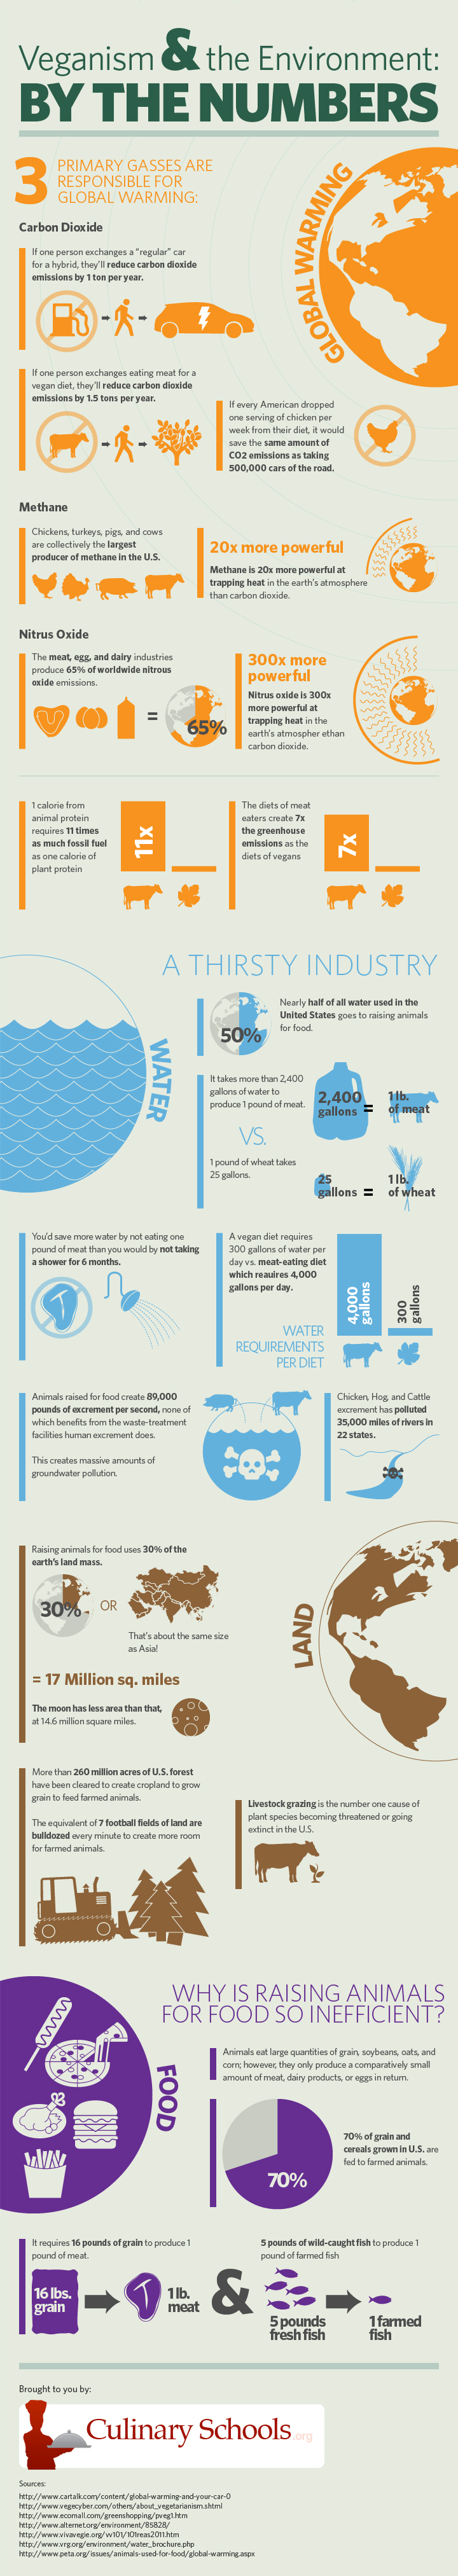 How Veganism and the Environment are linked 